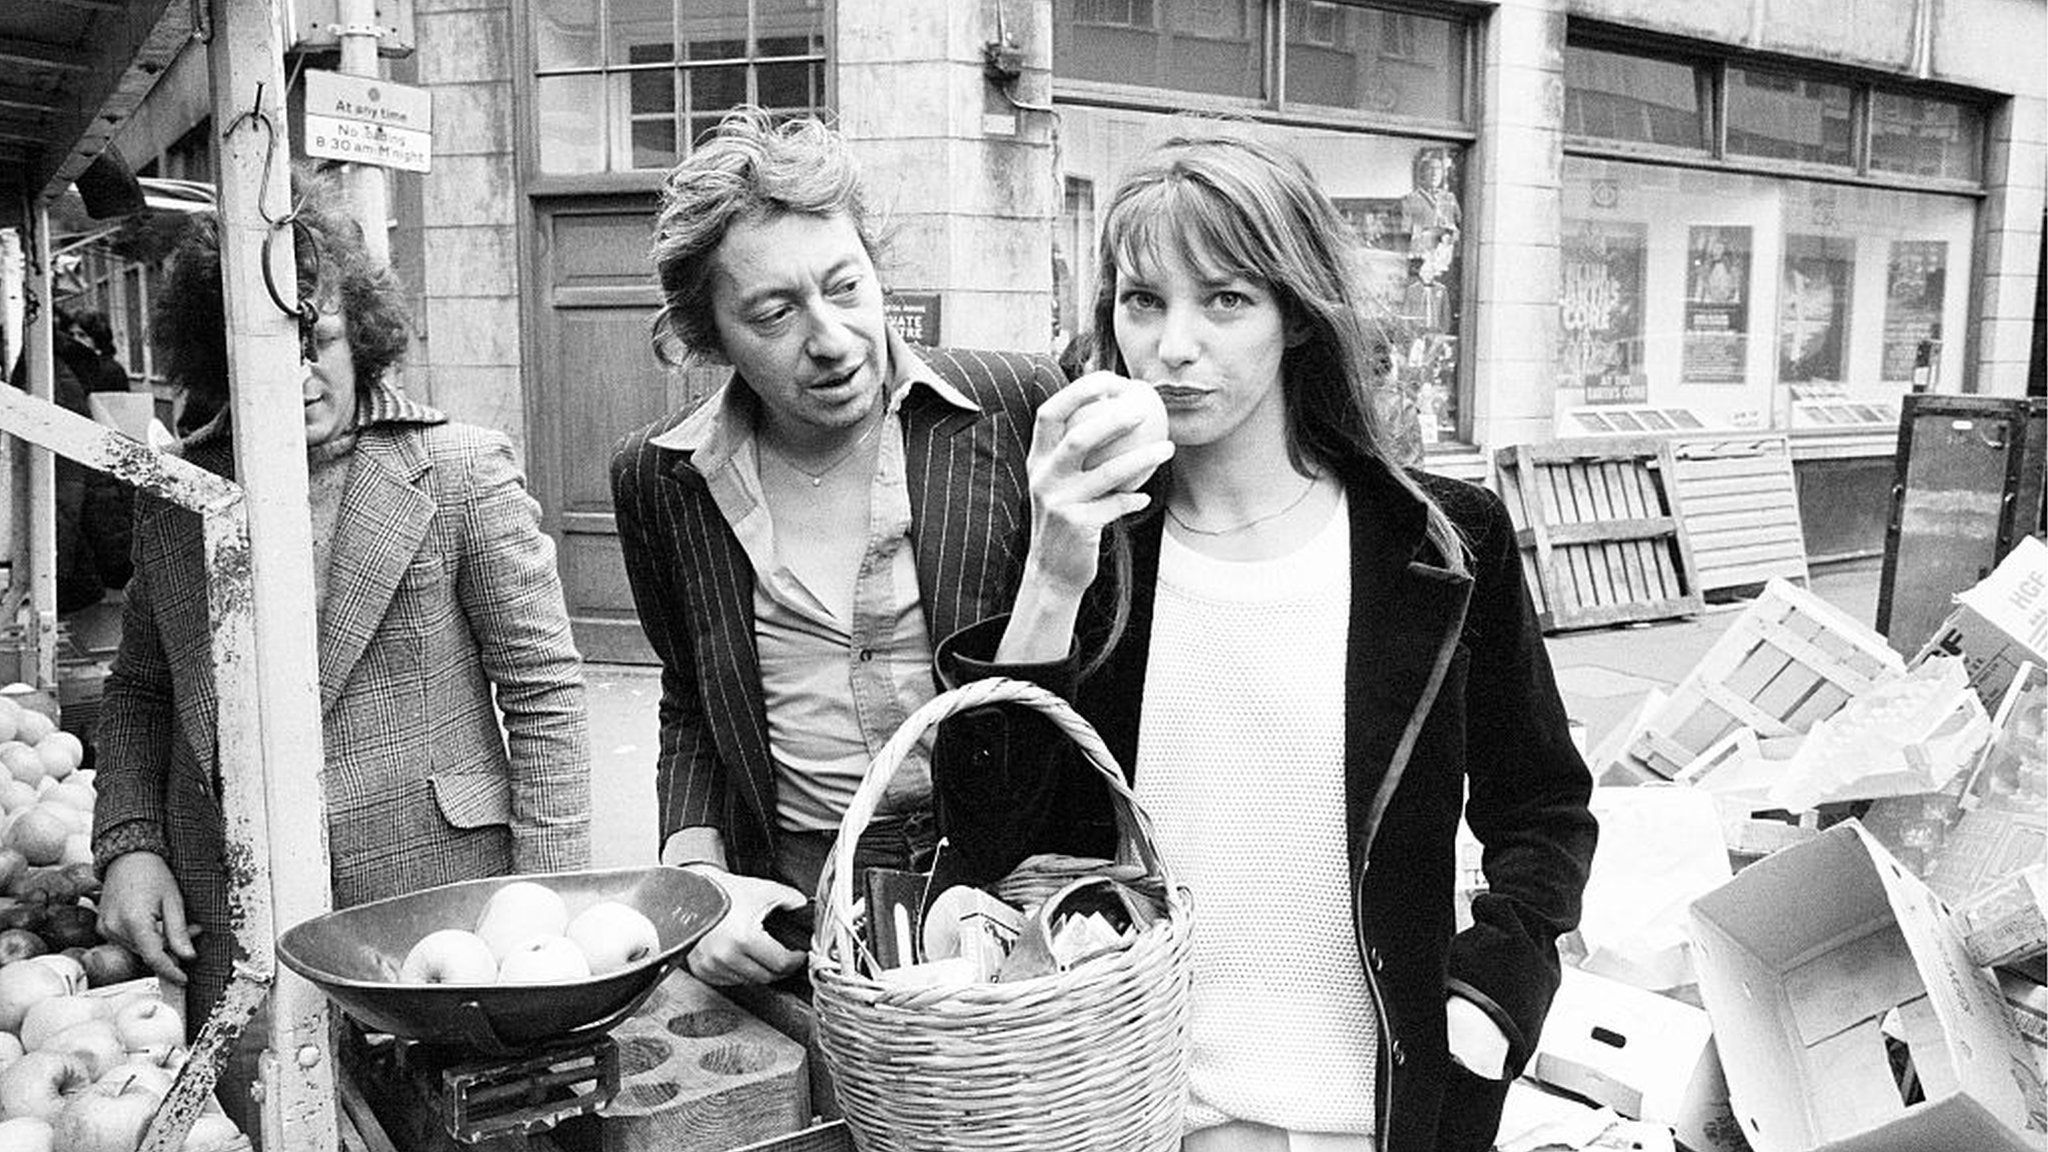 With Serge Gainsbourg in London in 1977